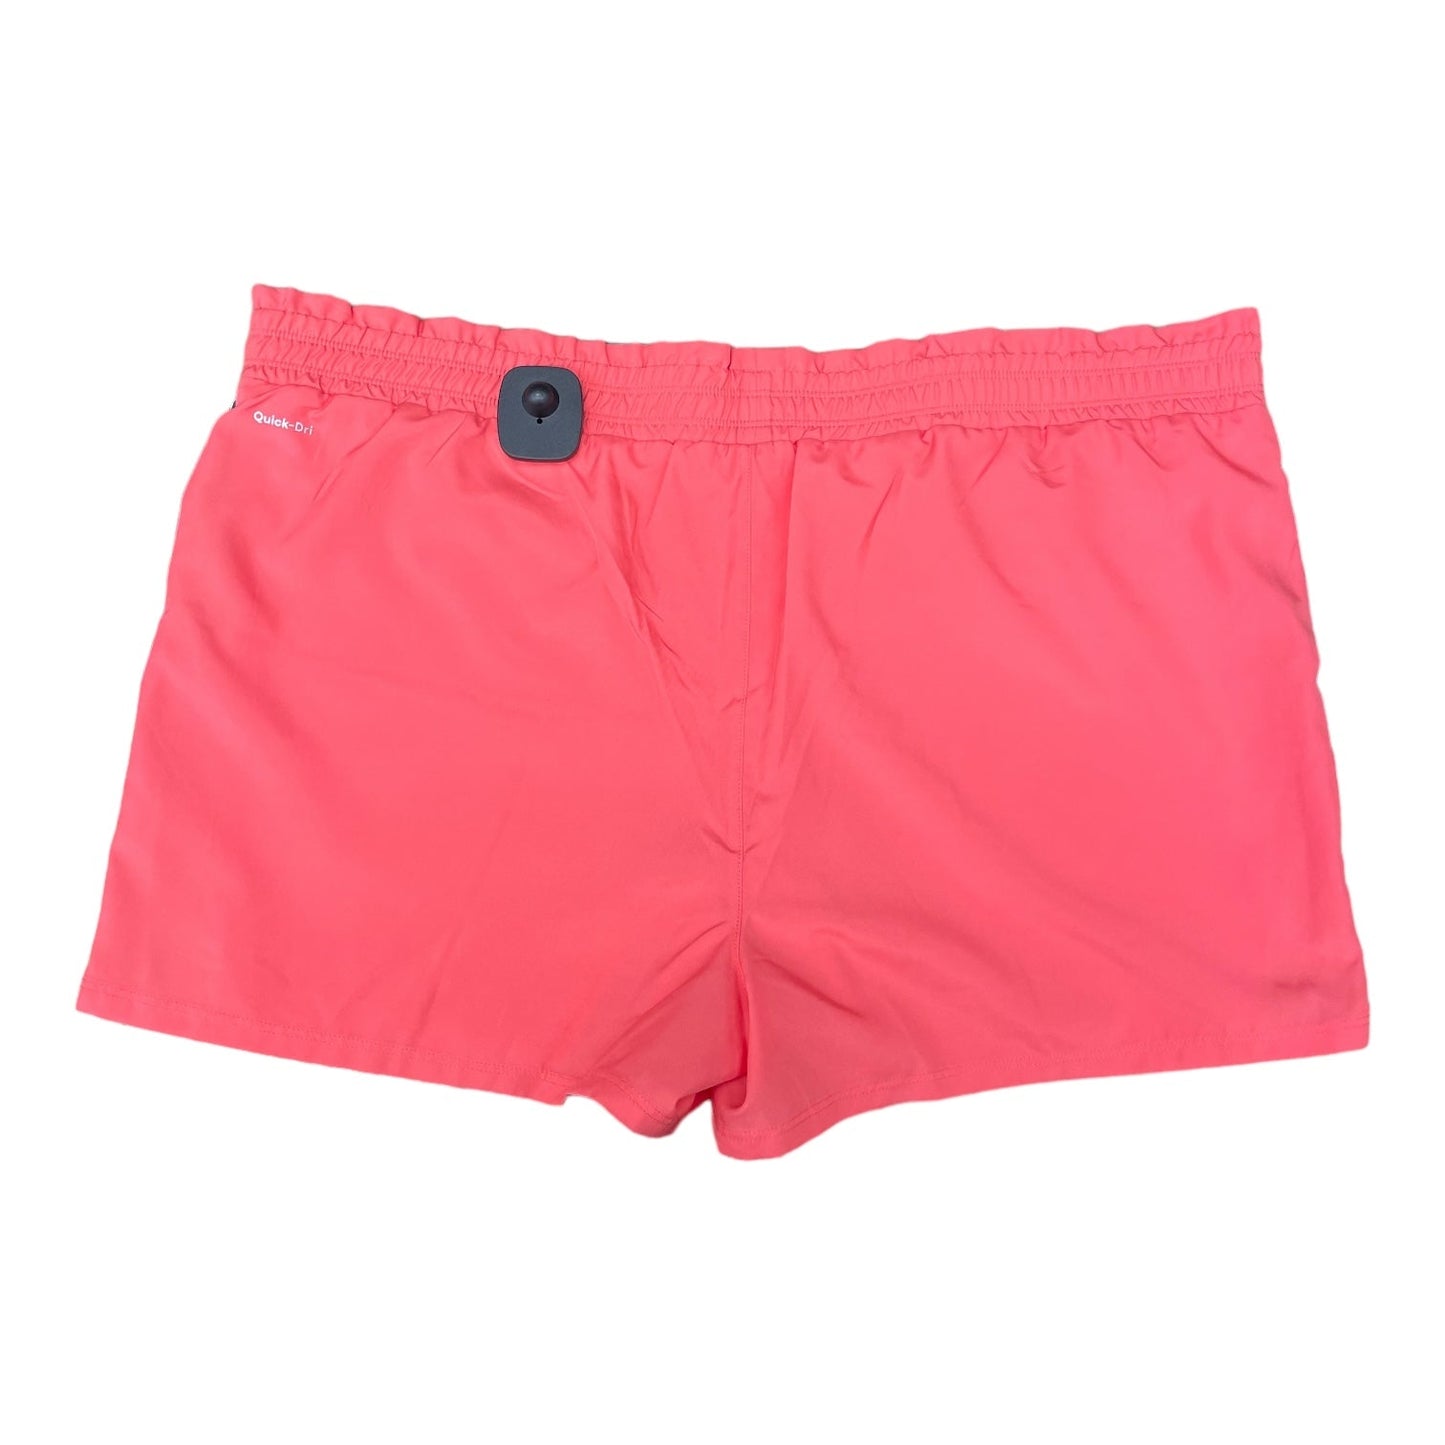 Pink Athletic Shorts Xersion, Size 3x